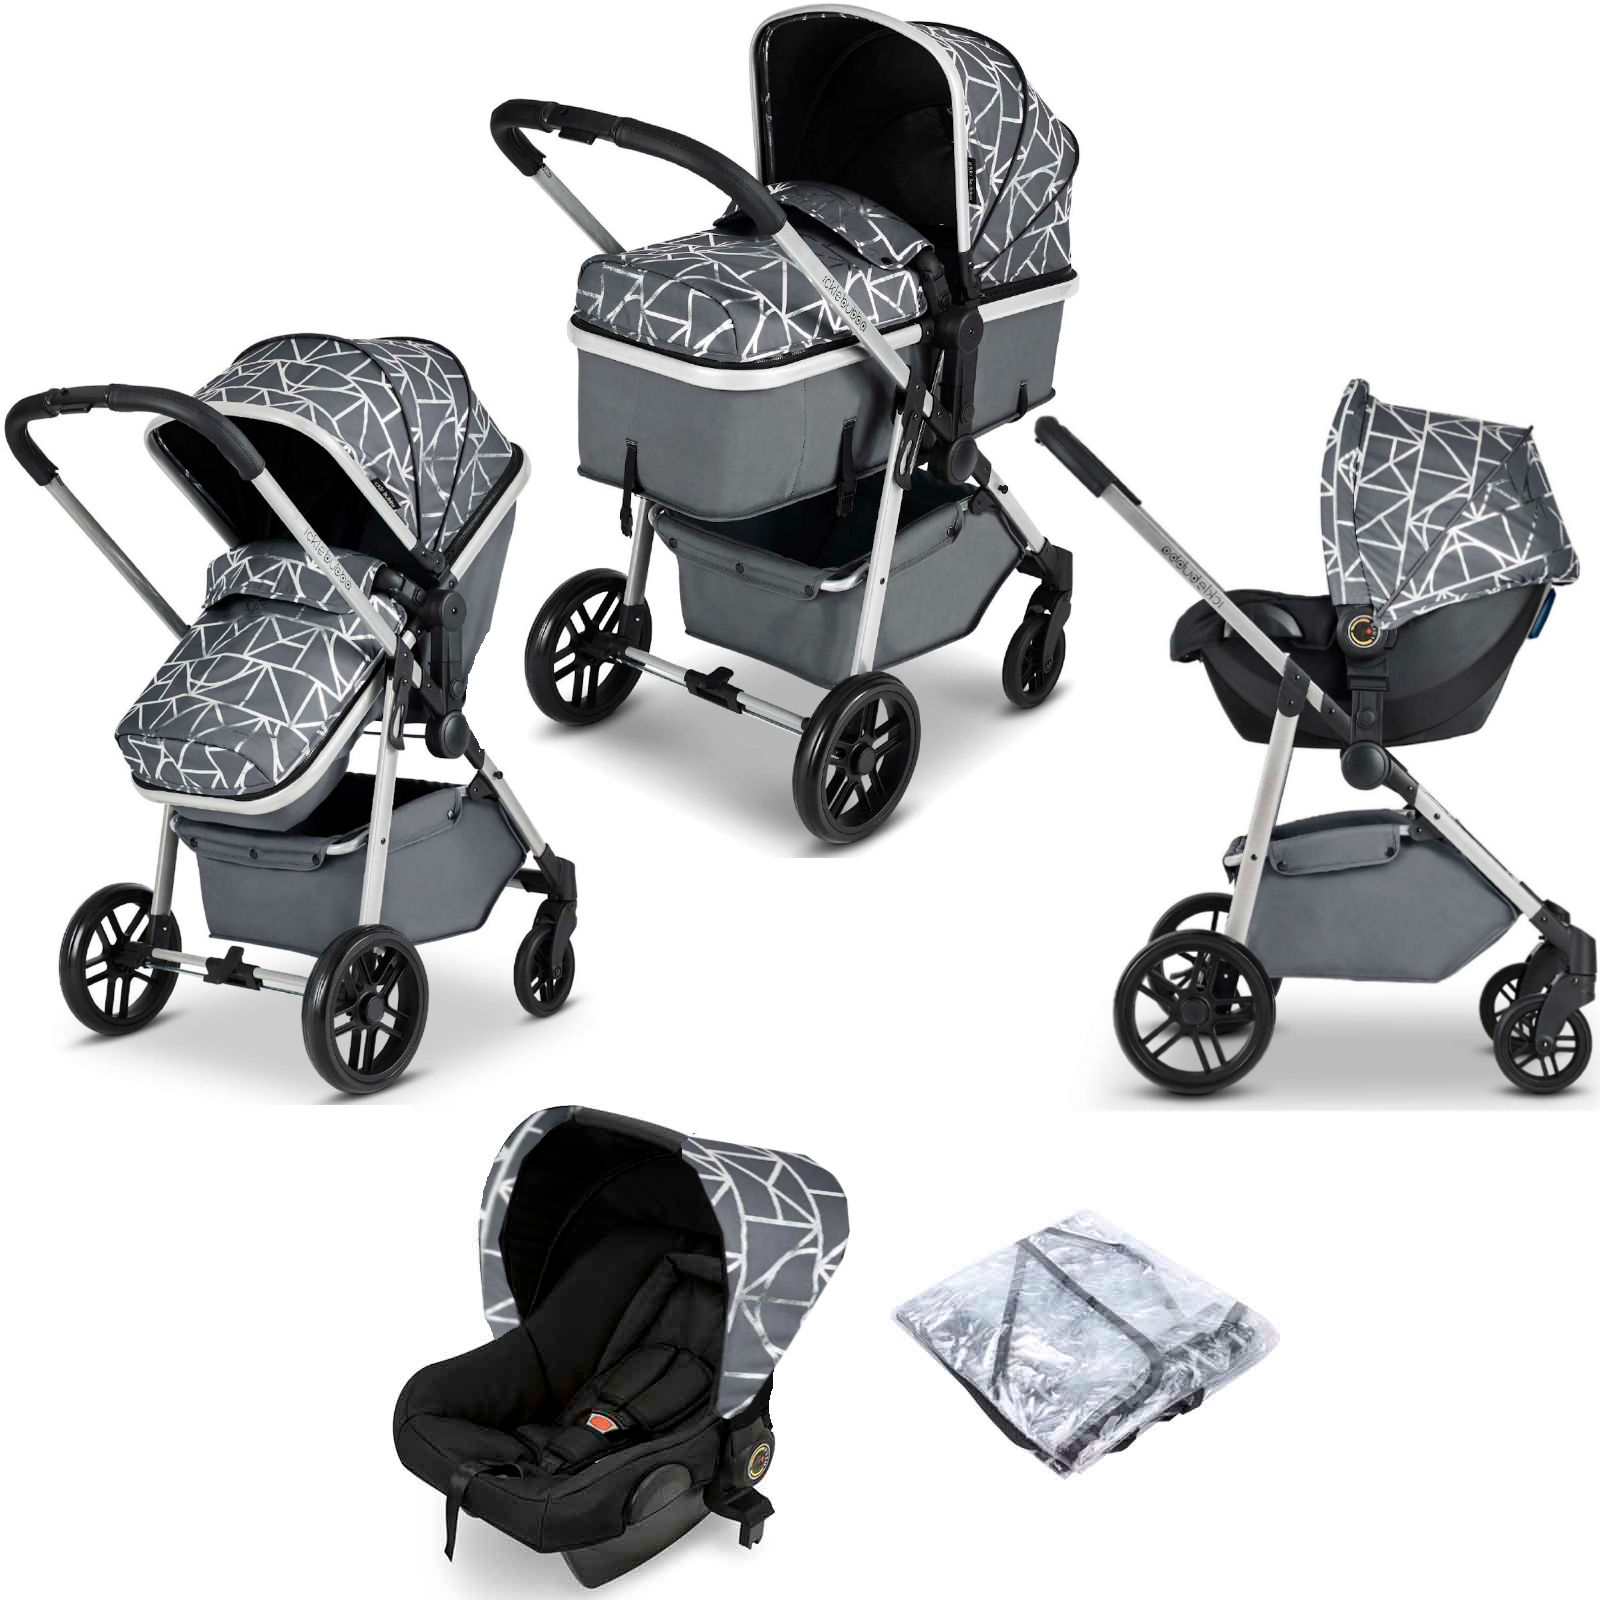 Ickle Bubba Moon 3 in 1 (Silver Chassis) Travel System - Sparkle...